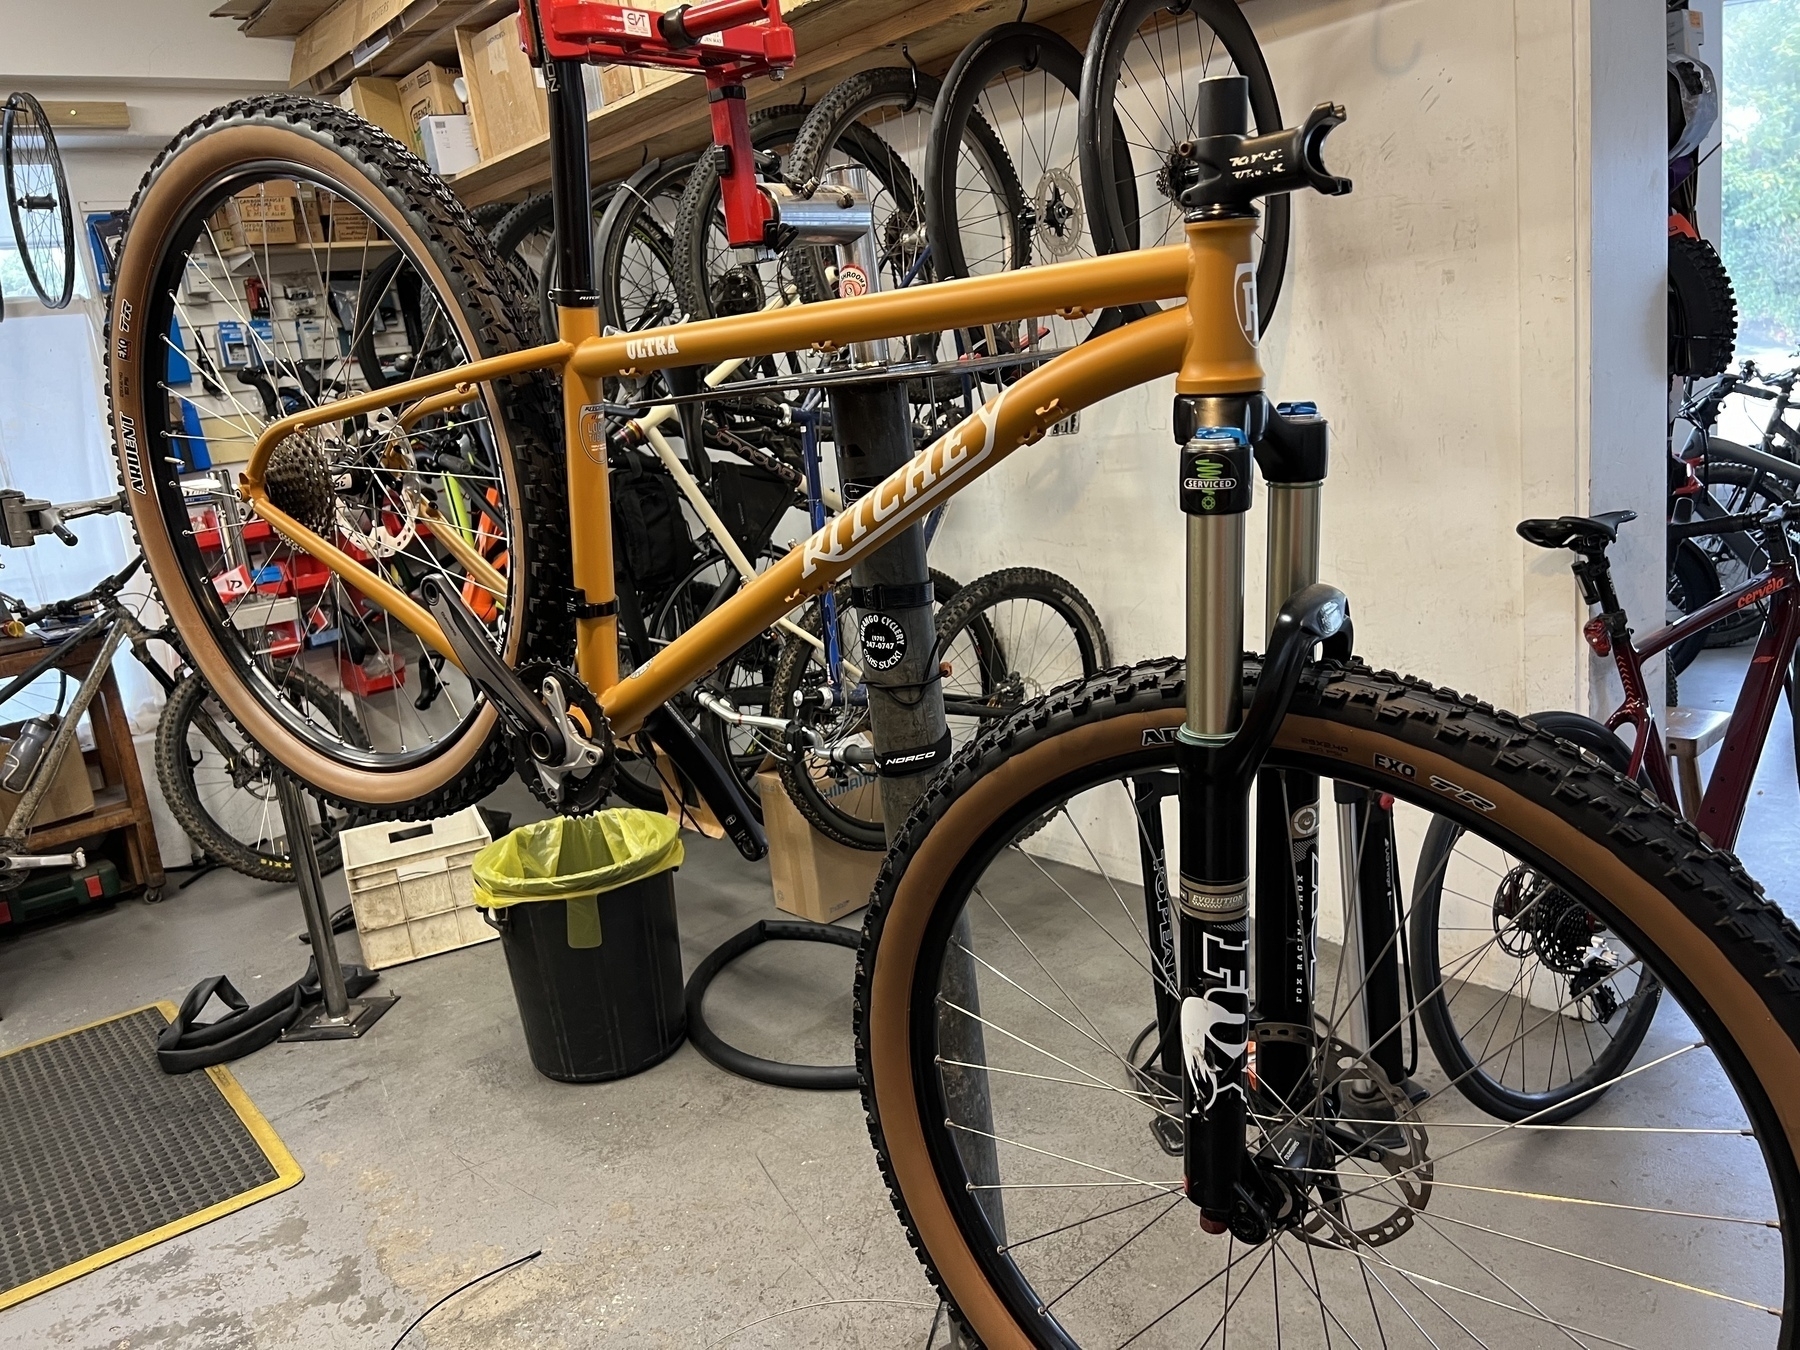 A Ritchey Ultra steel mountain bike frame on a work stand. It’s partially built up and needs brakes, derailleurs, a seat and handlebars. The background is a busy-with-bikes but meticulously tidy bike shop.